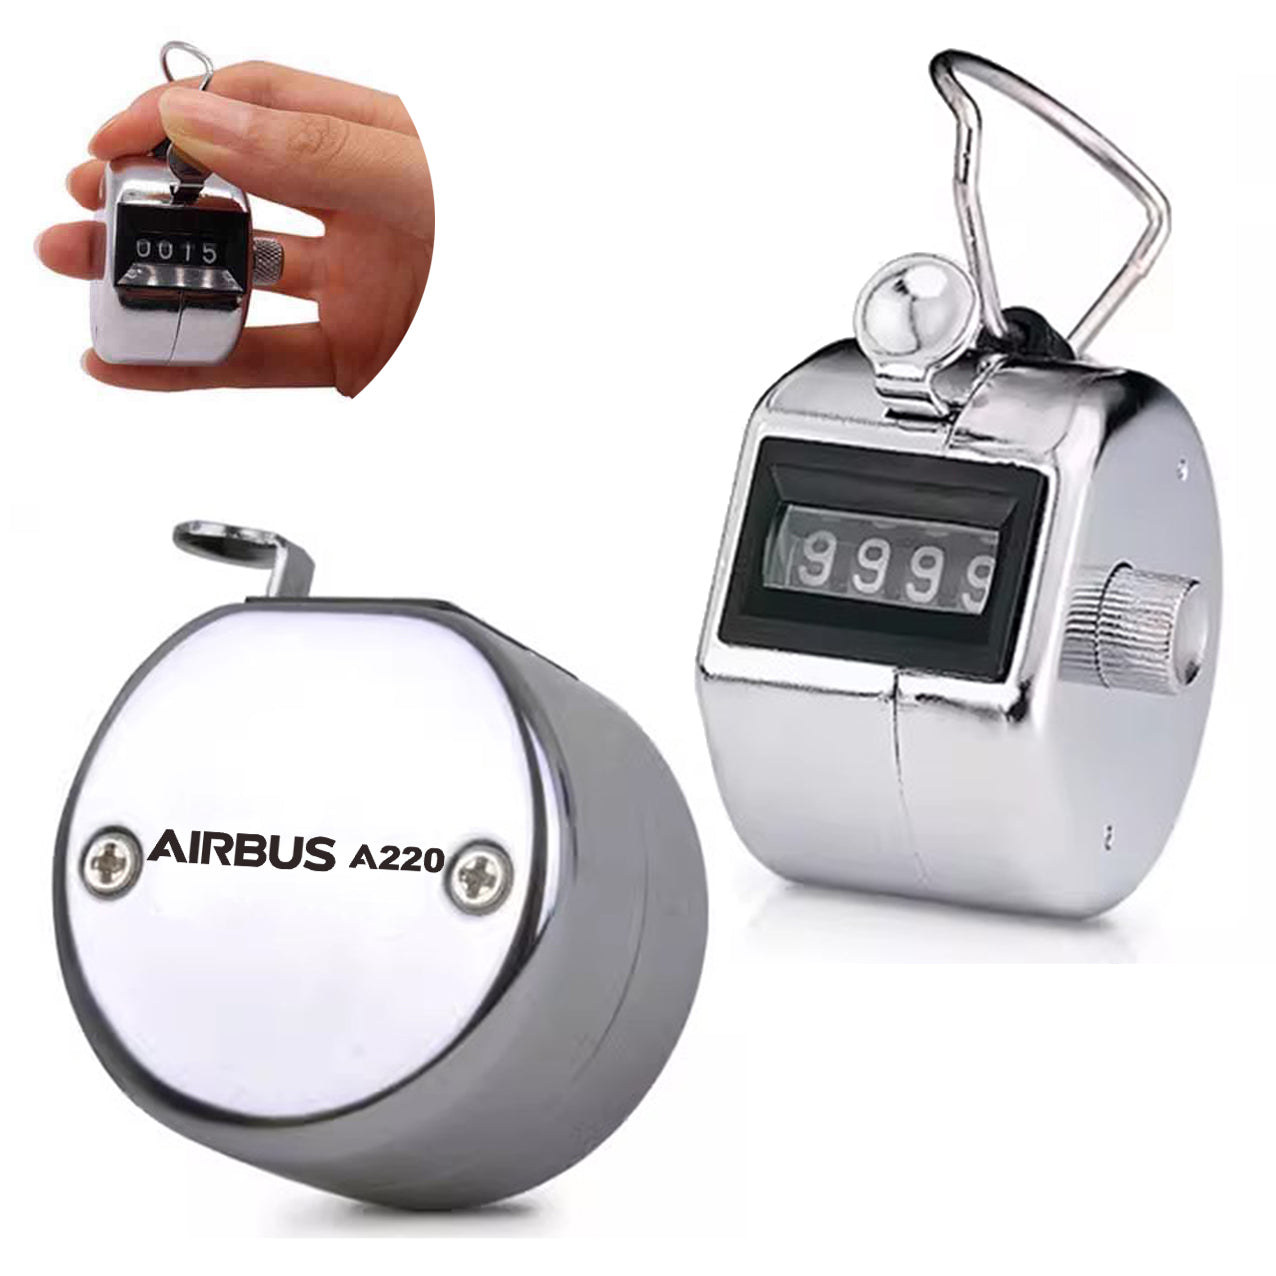 The Airbus A220 Designed Metal Handheld Counters